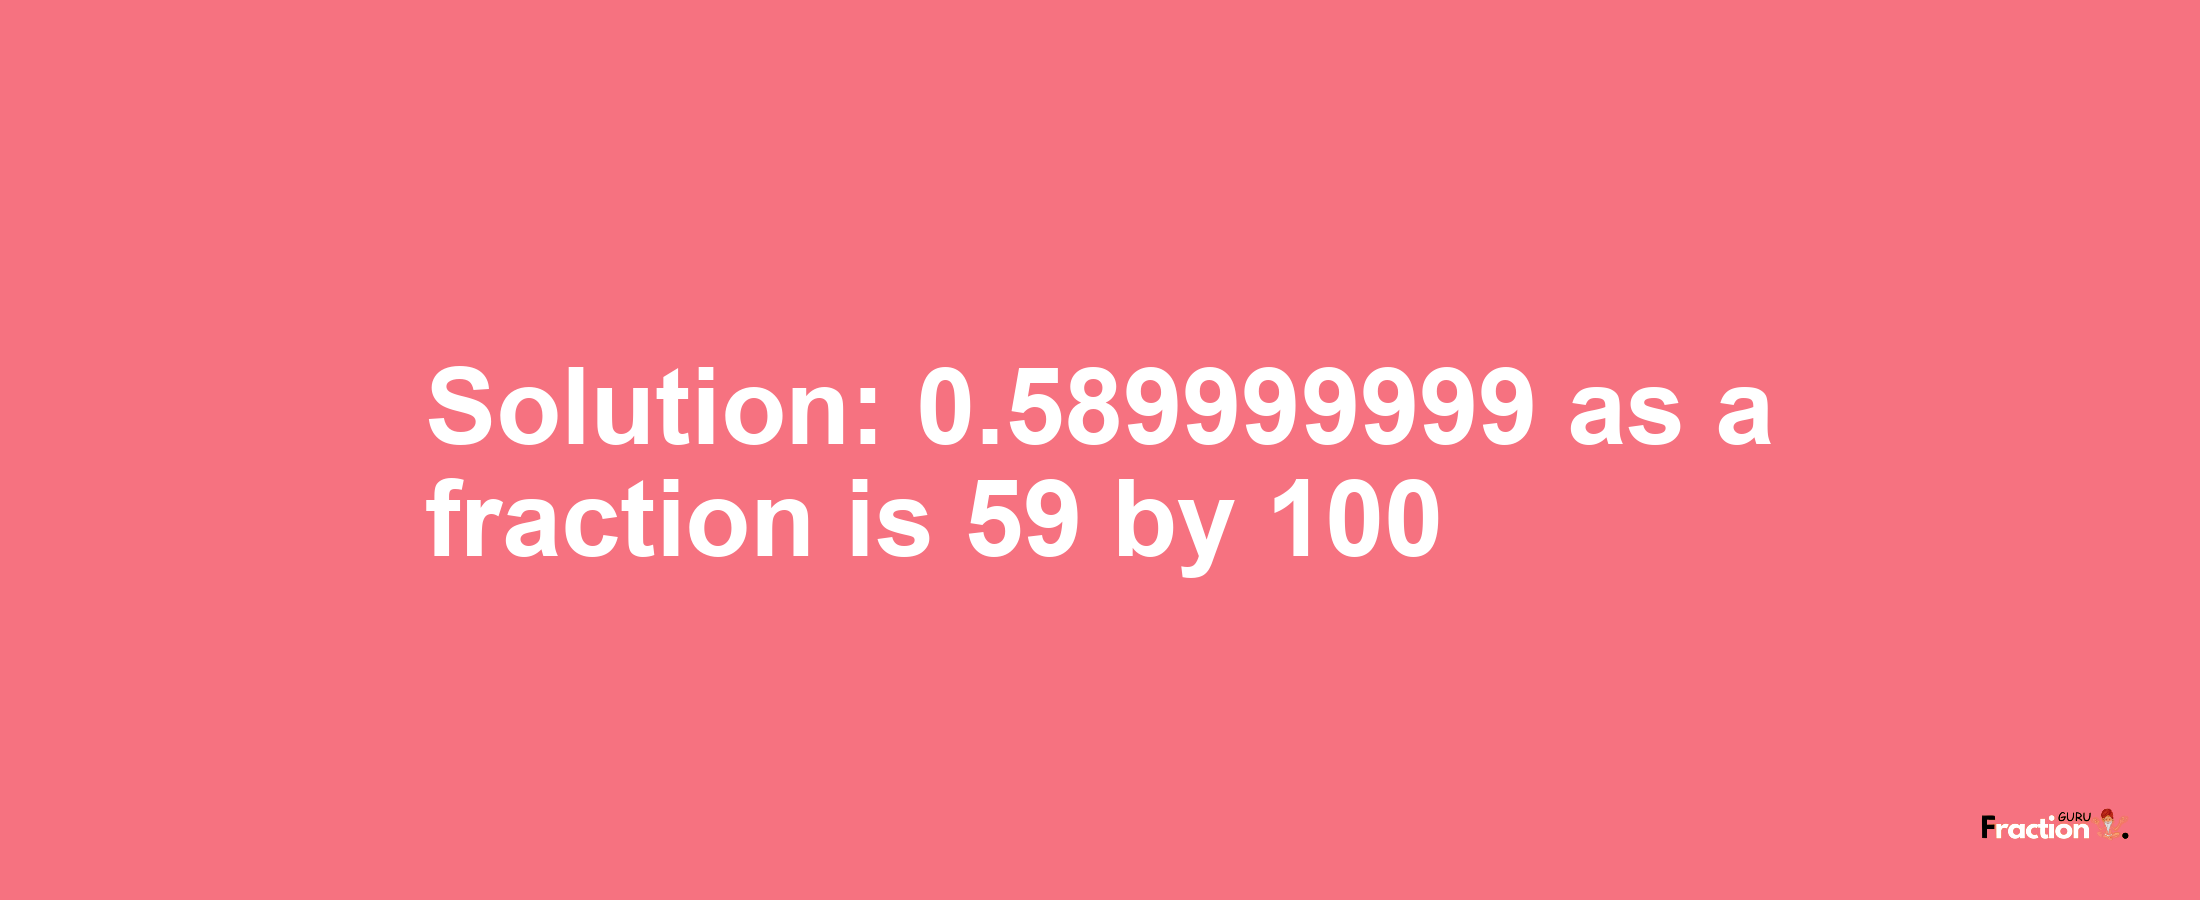 Solution:0.589999999 as a fraction is 59/100